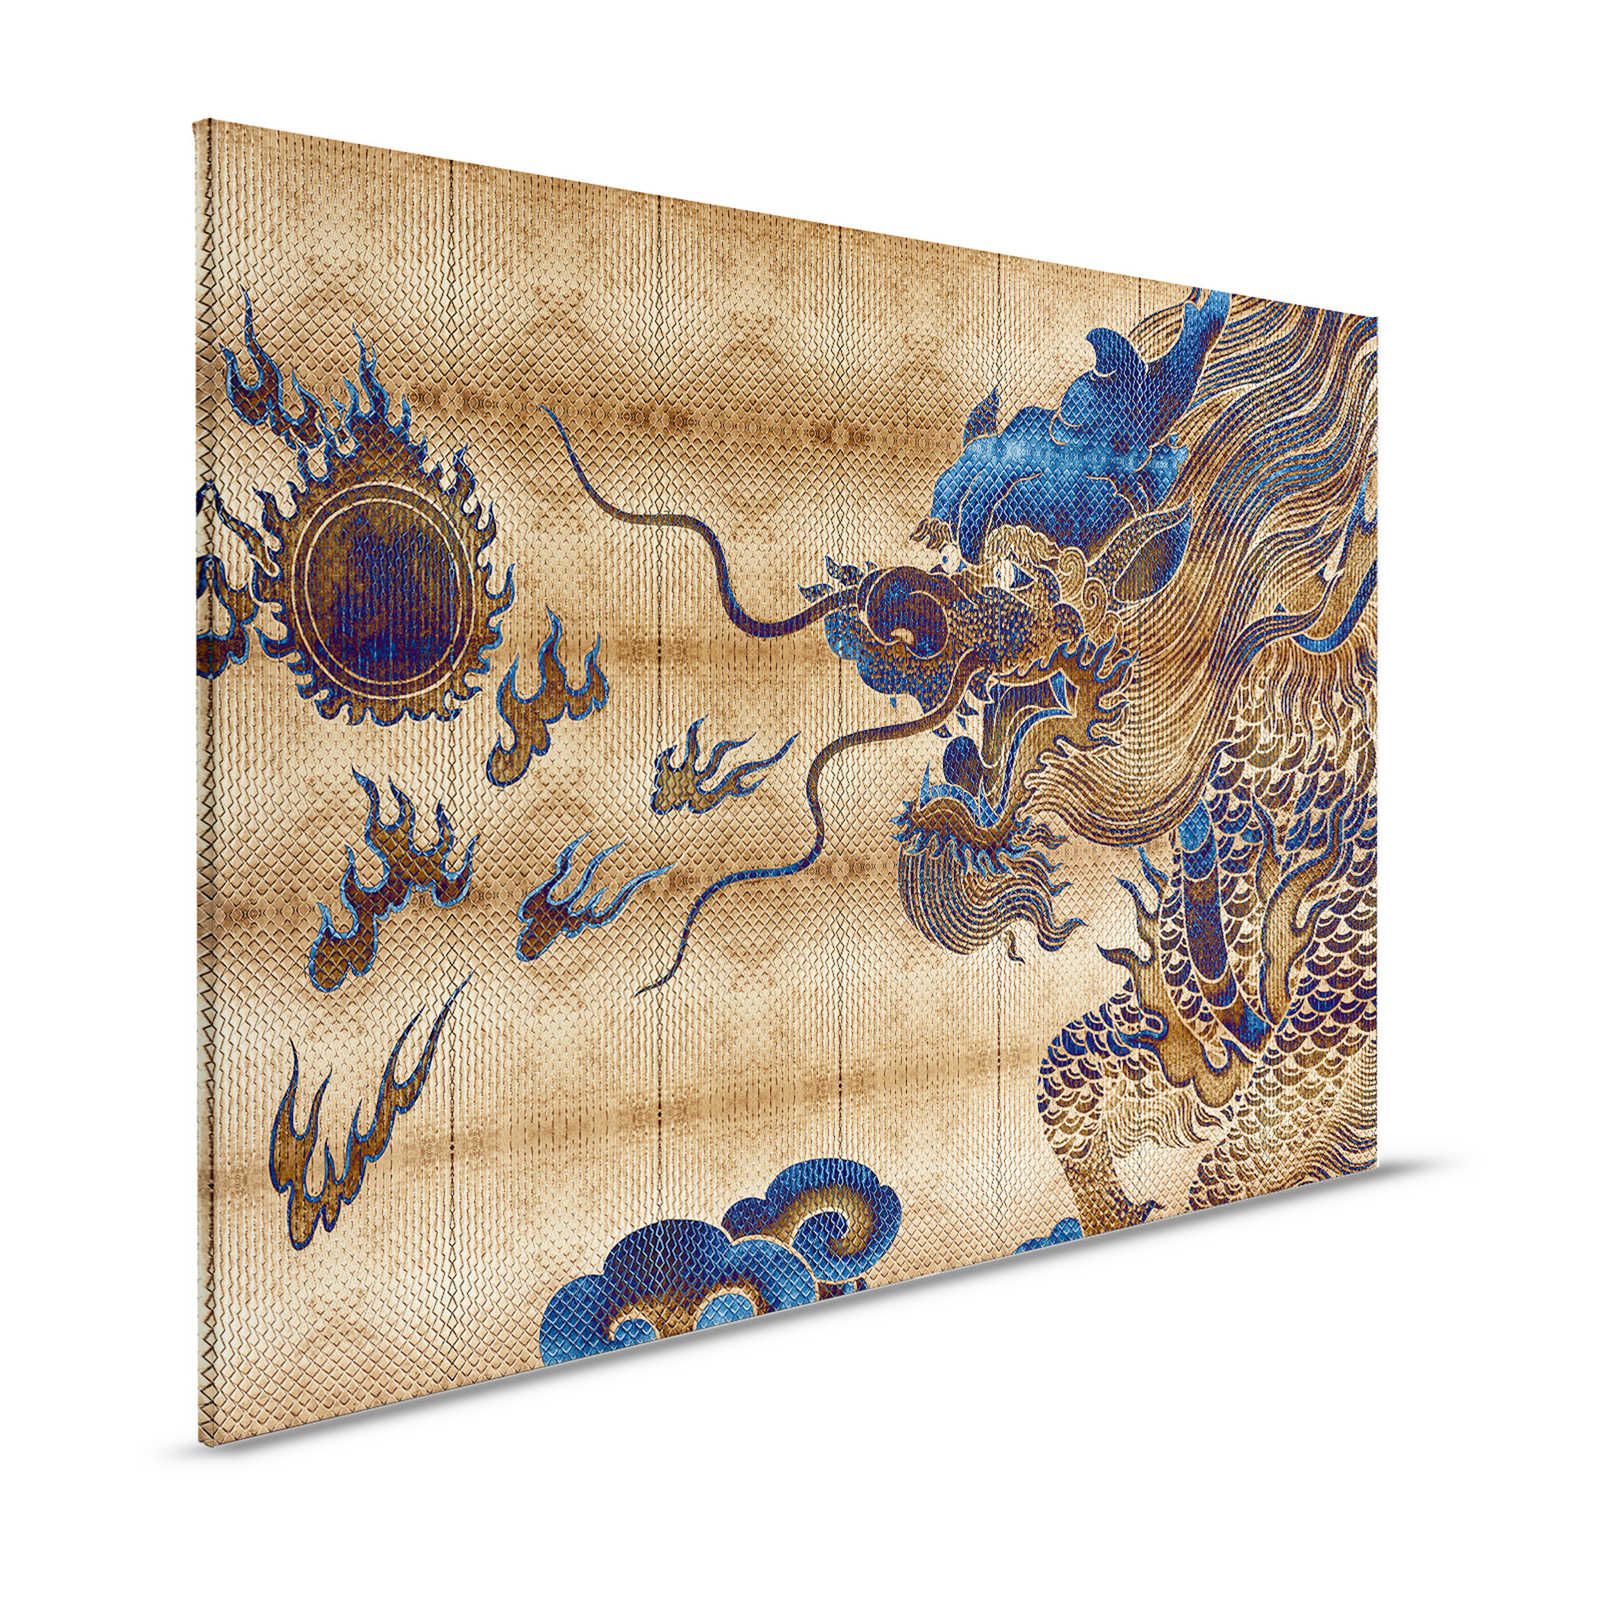 Shenzen 2 - Canvas painting Gold Dragon in Asian Syle - 1,20 m x 0,80 m
